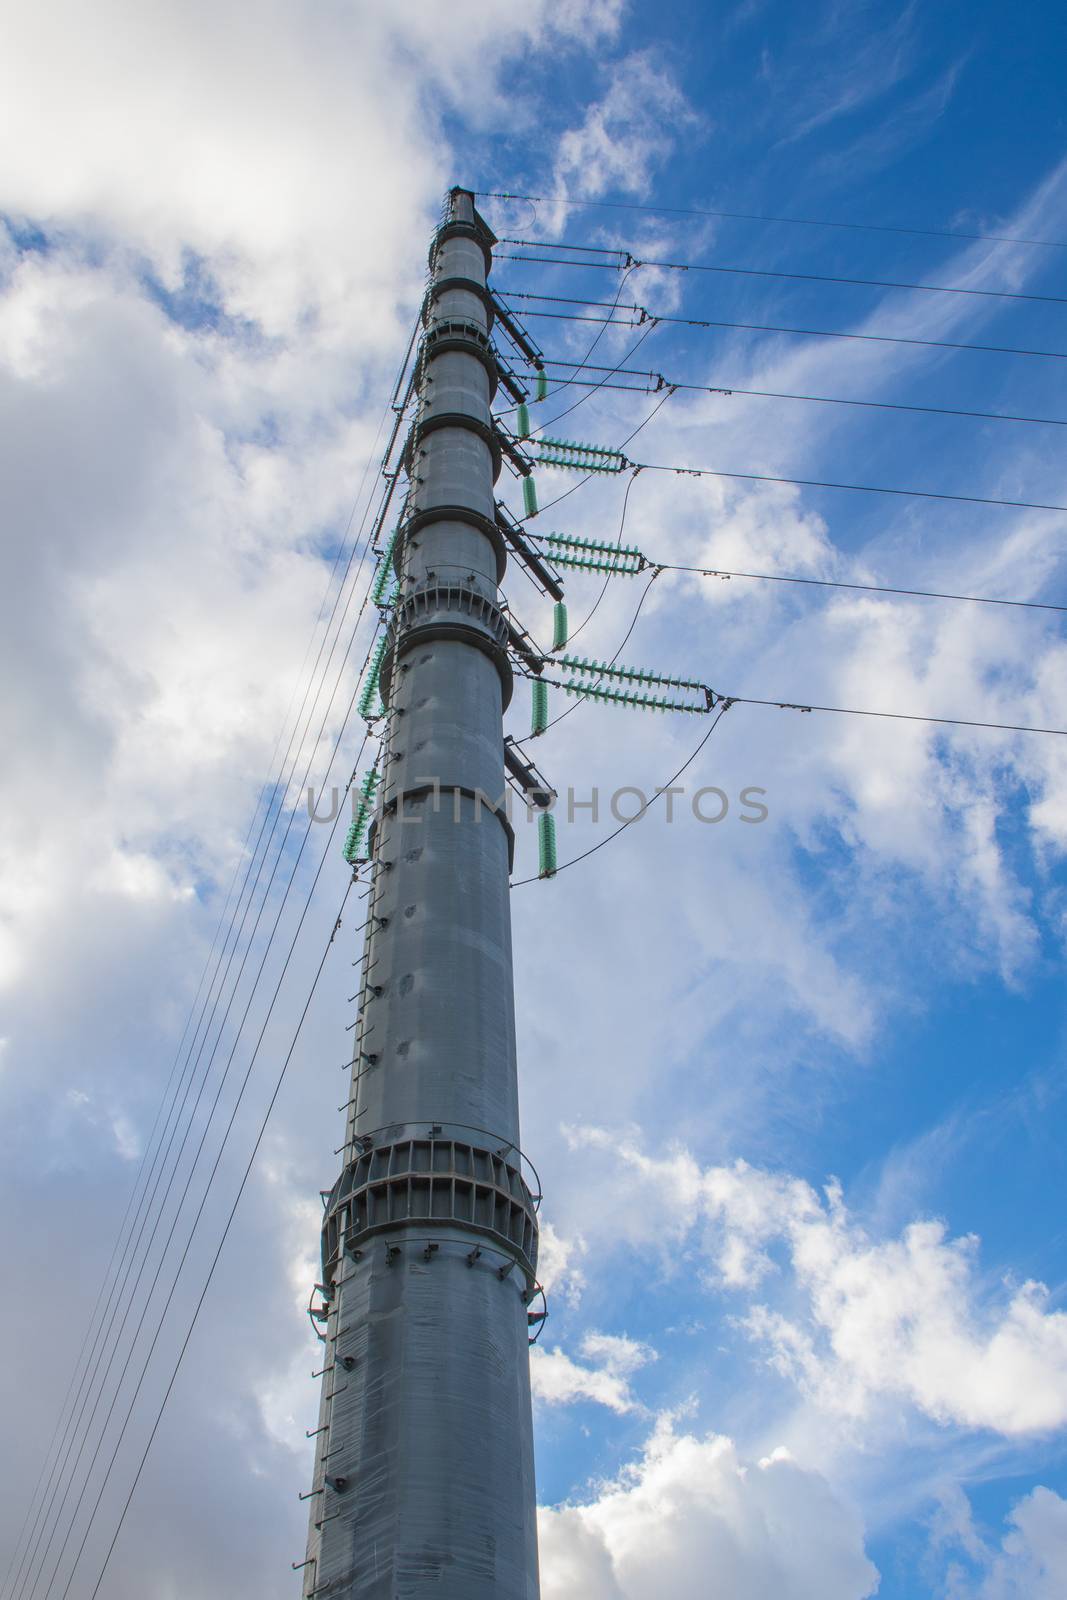 High-voltage power lines and insulators over blue sky background